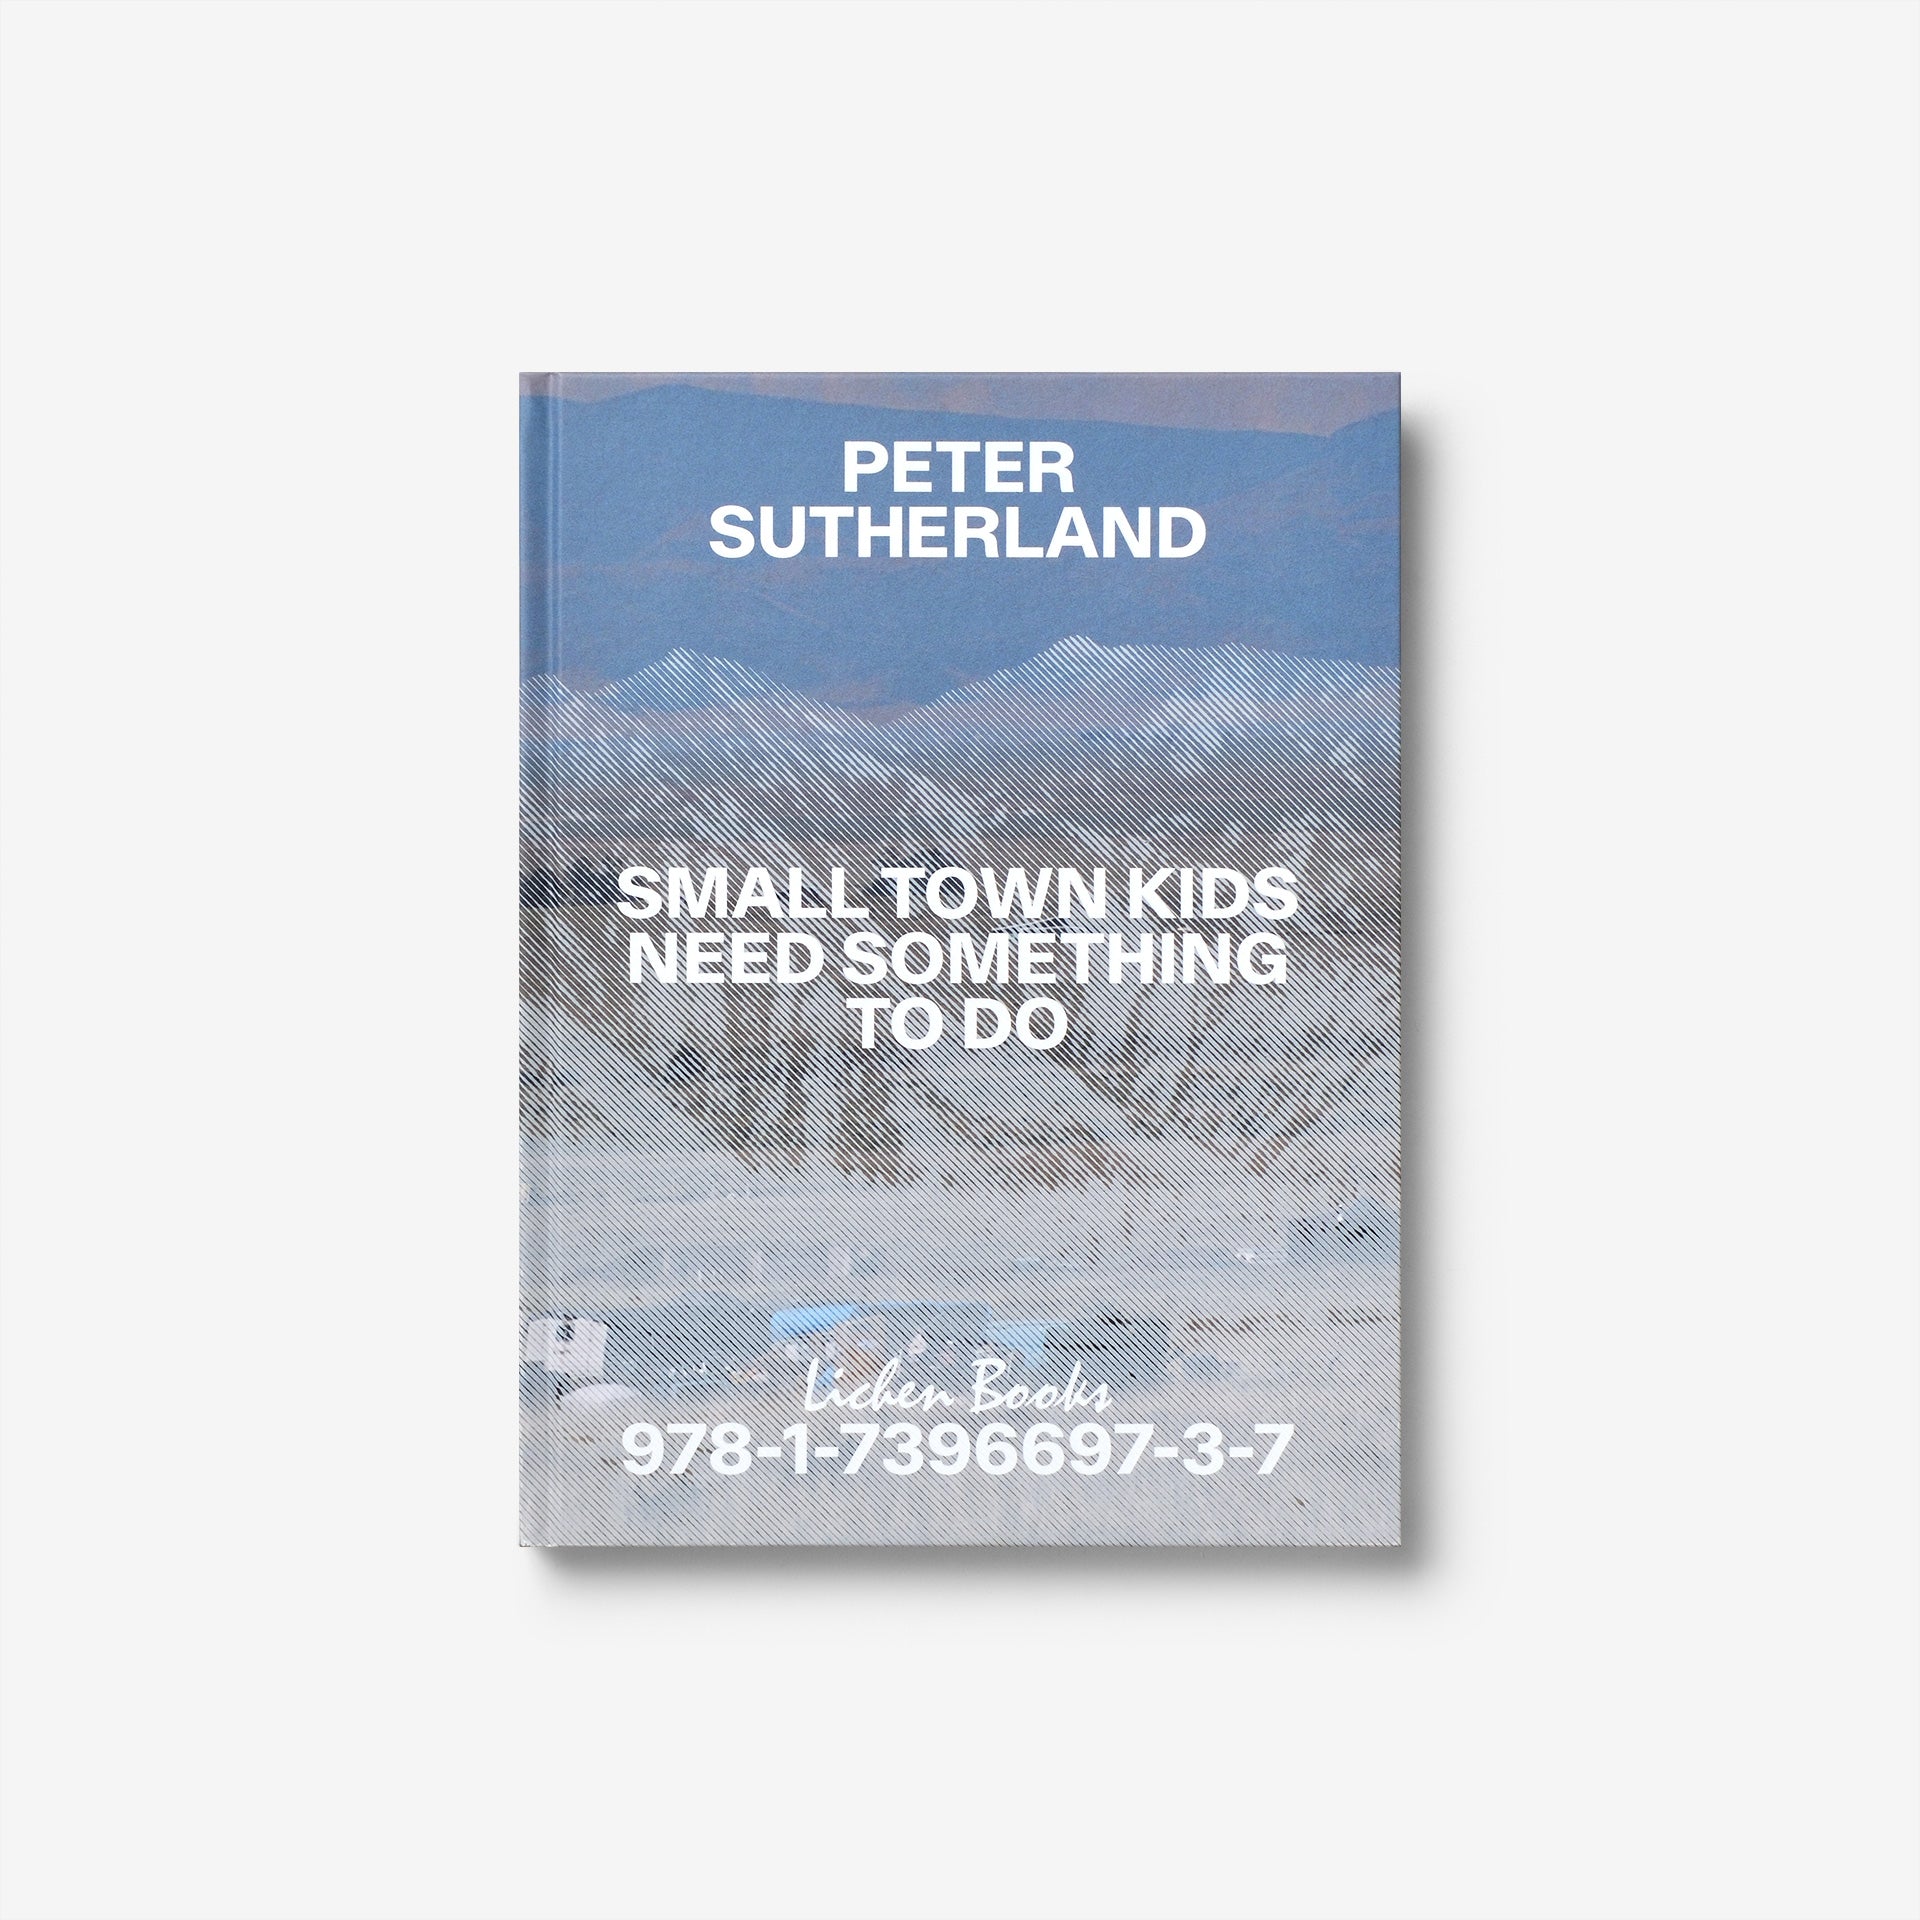 Peter Sutherland: Small Town Kids Need Something To Do